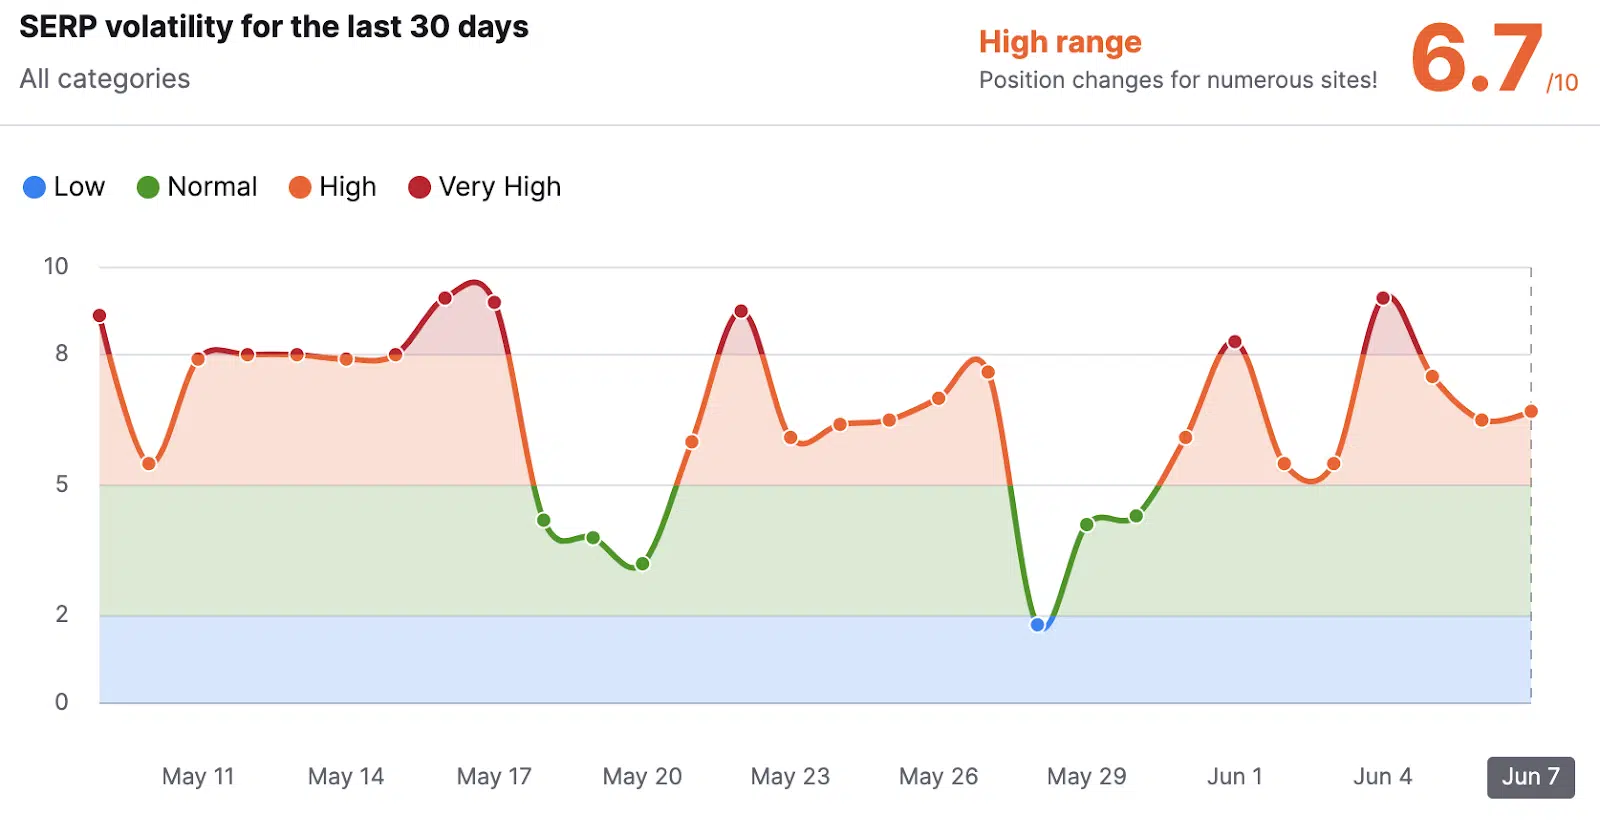 SERP volatility - May to June